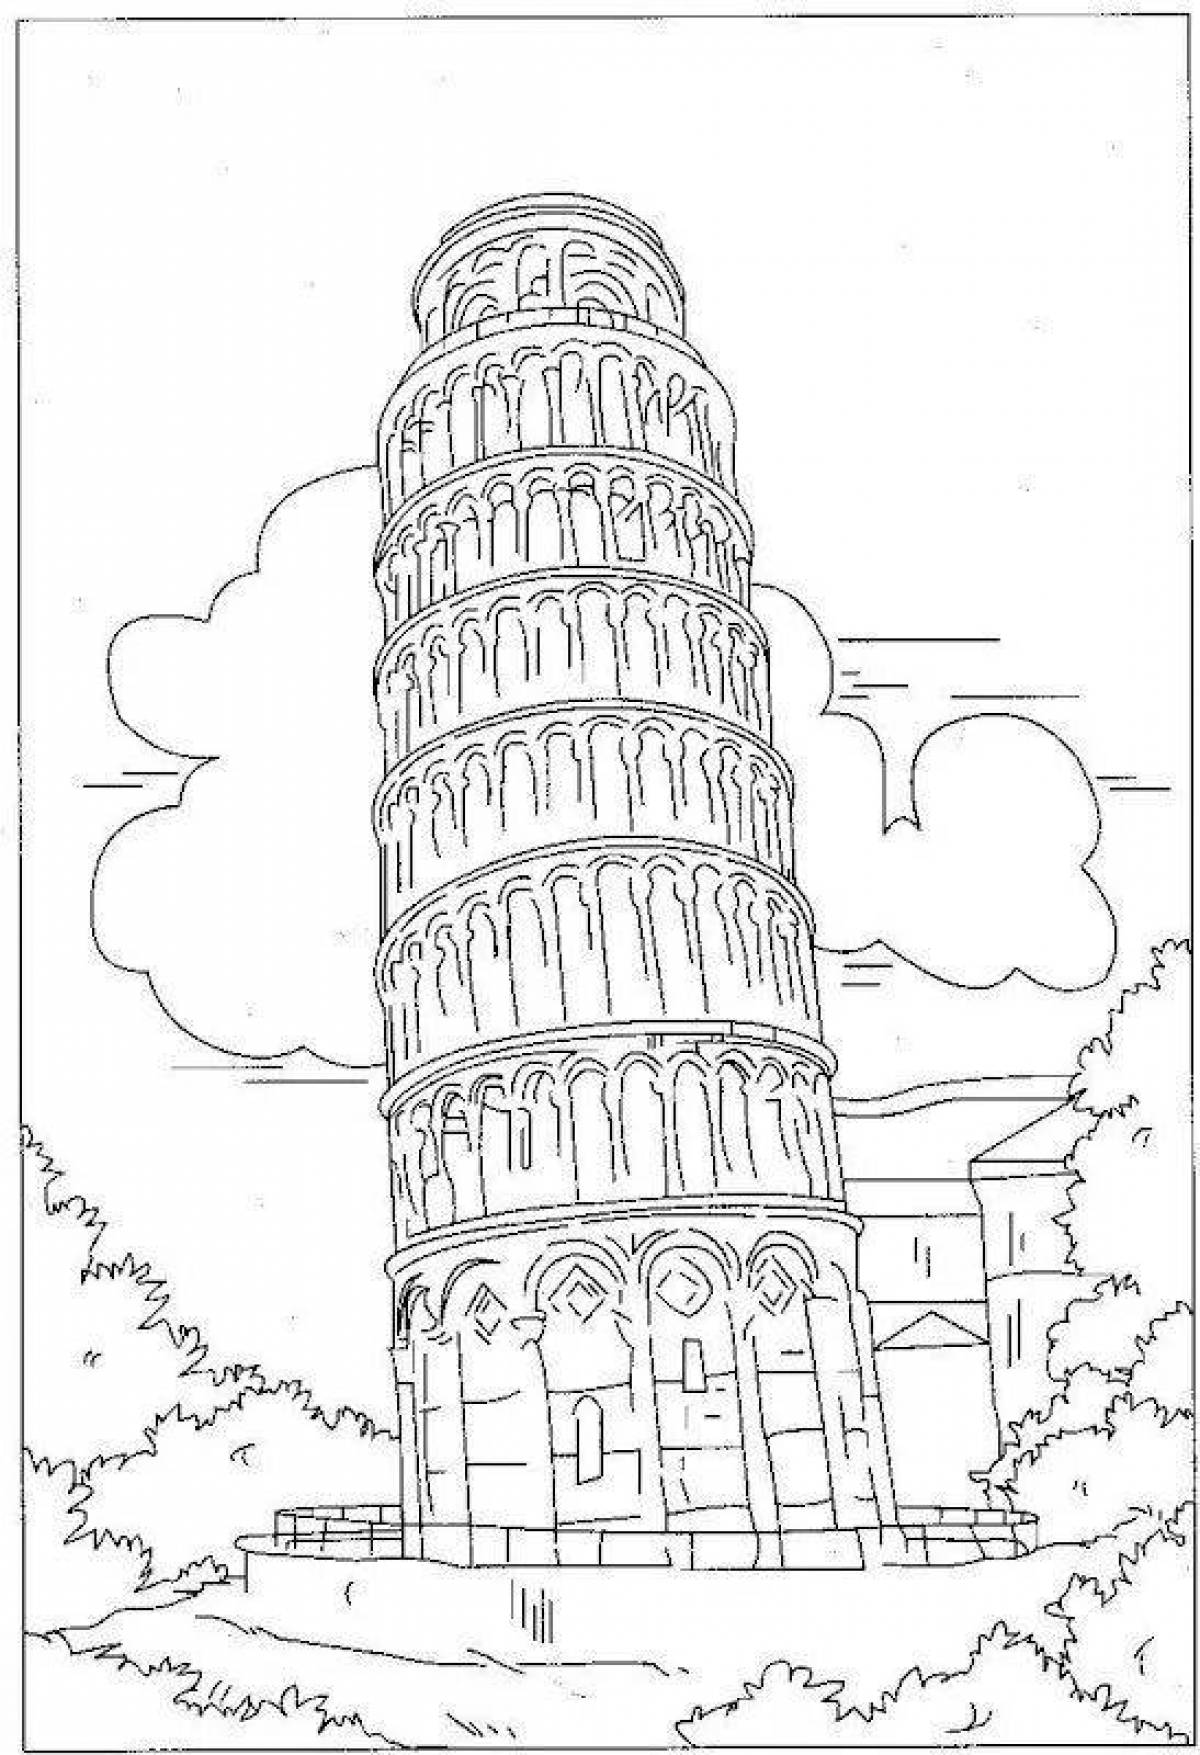 Intricate coloring of the Leaning Tower of Pisa